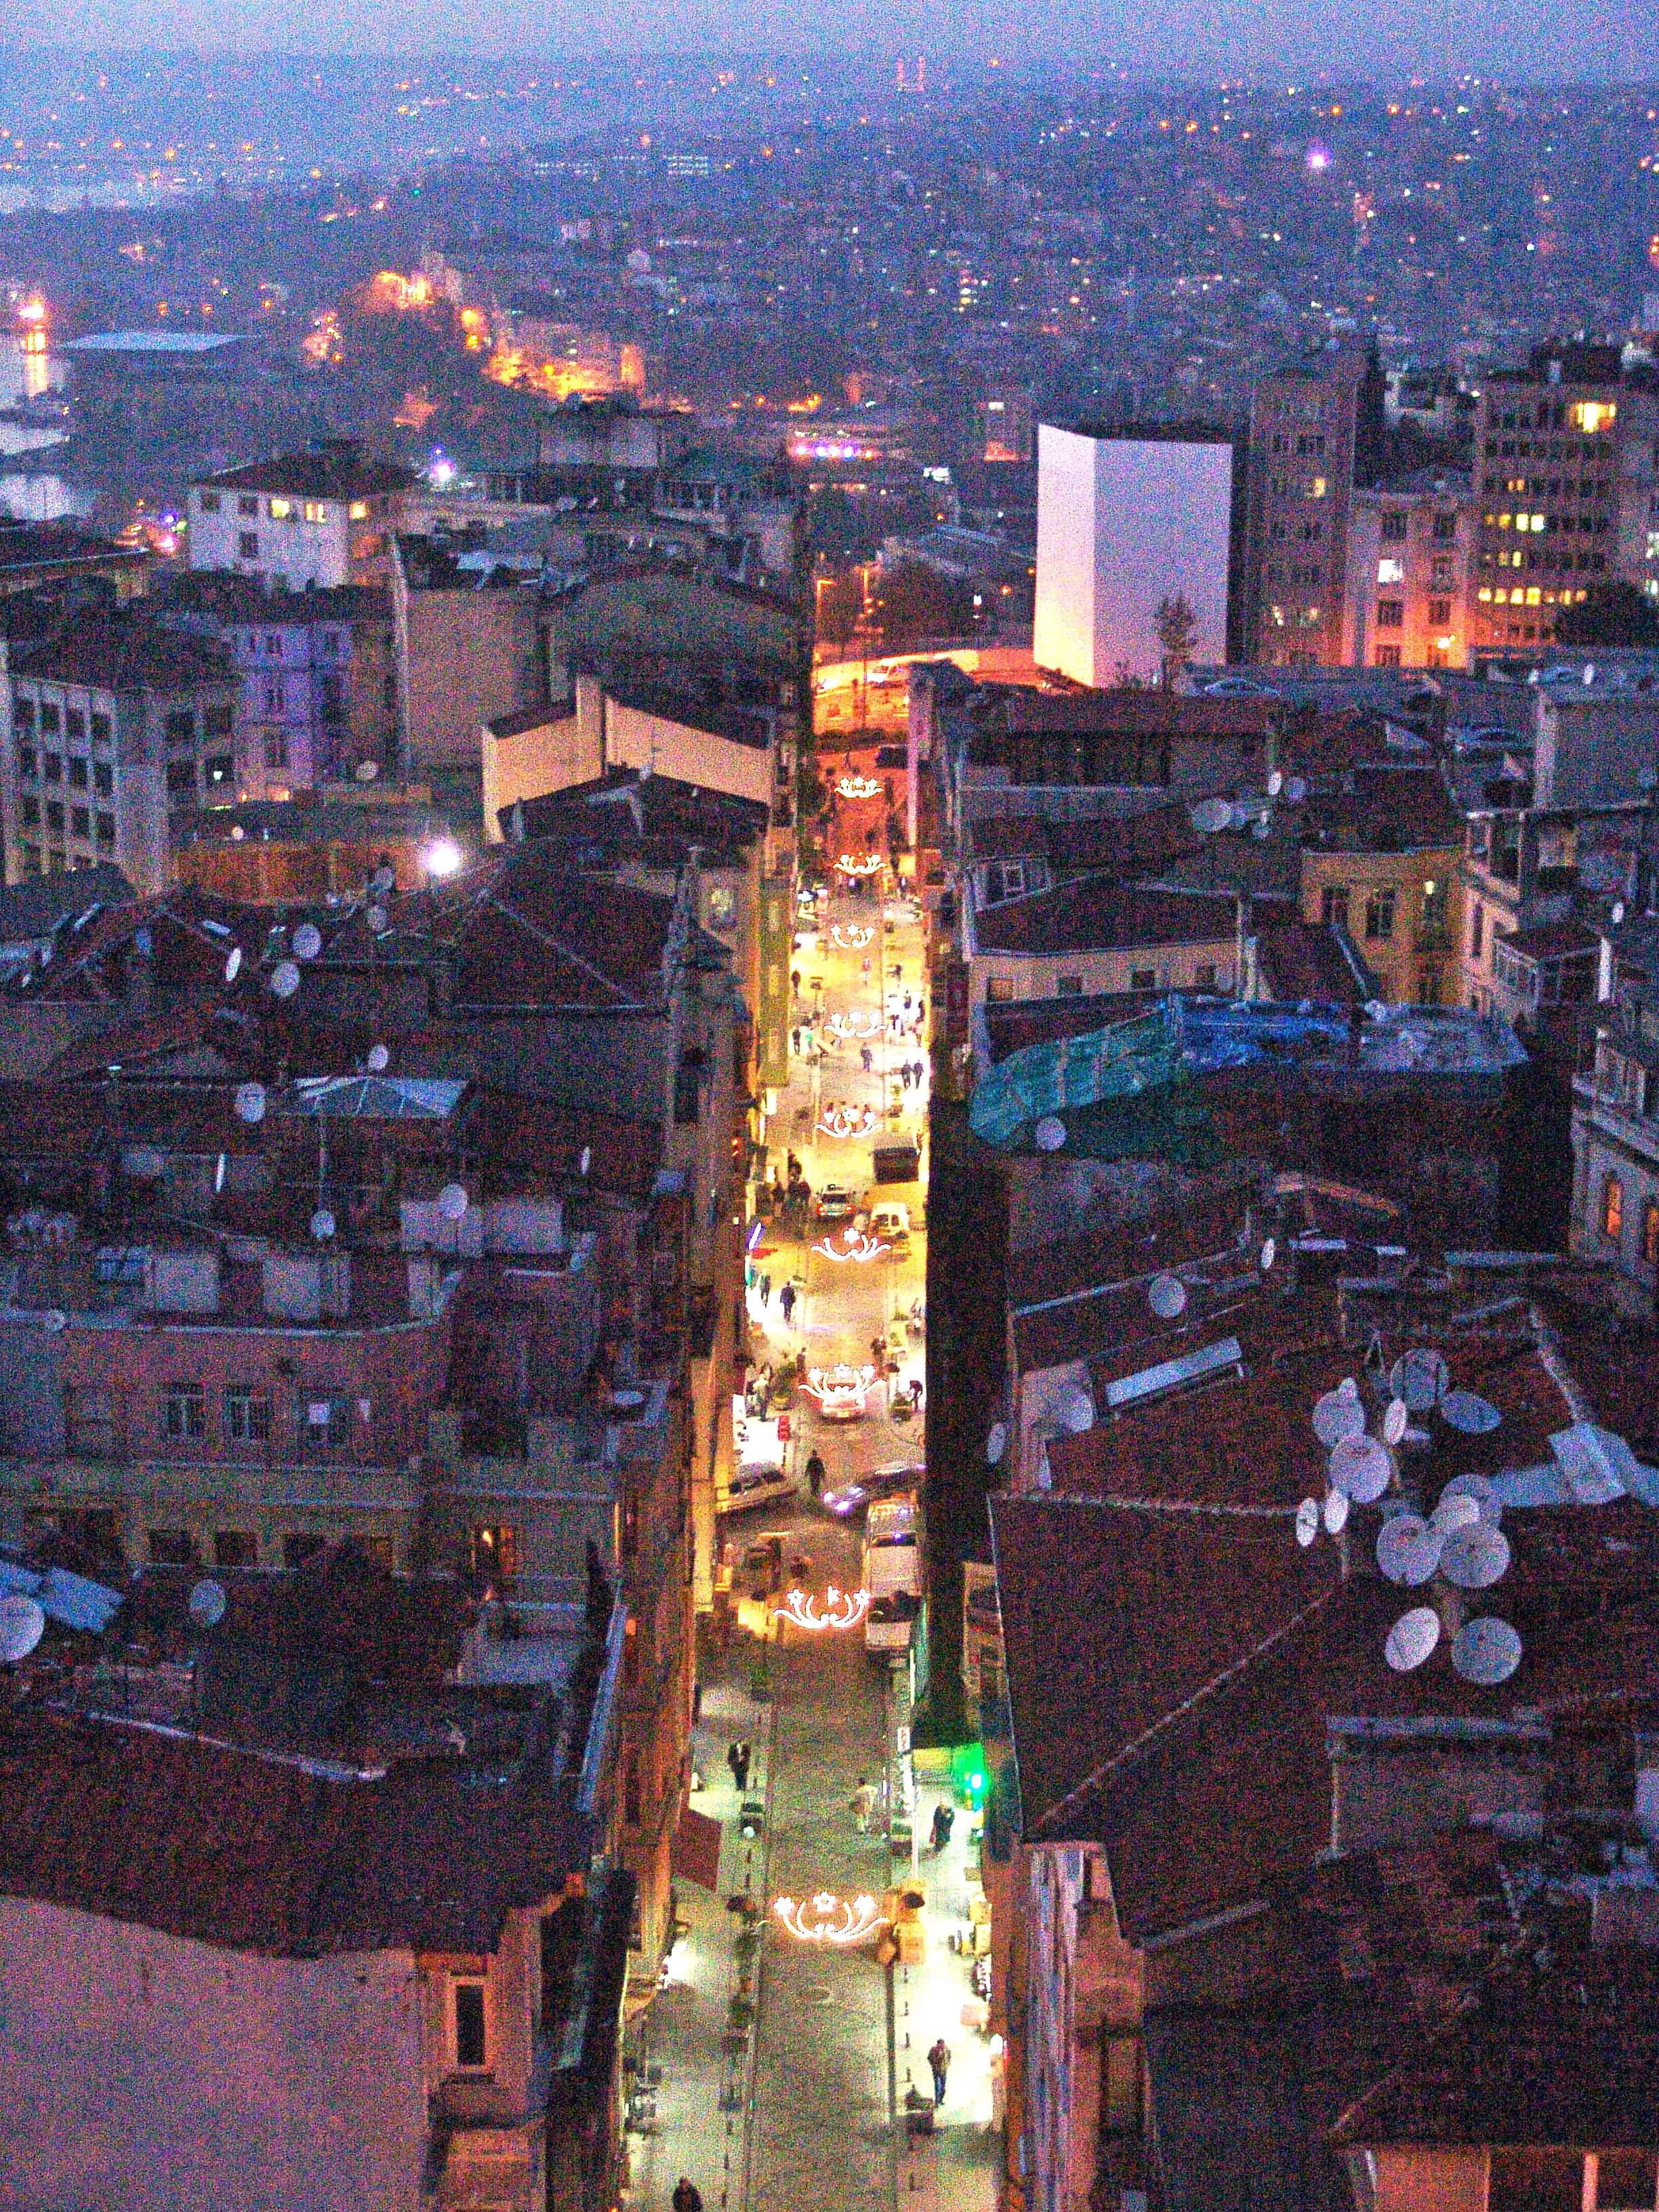 Looking down after sunset from the top of the Galata Tower in Beyoğlu, Istanbul, Turkey